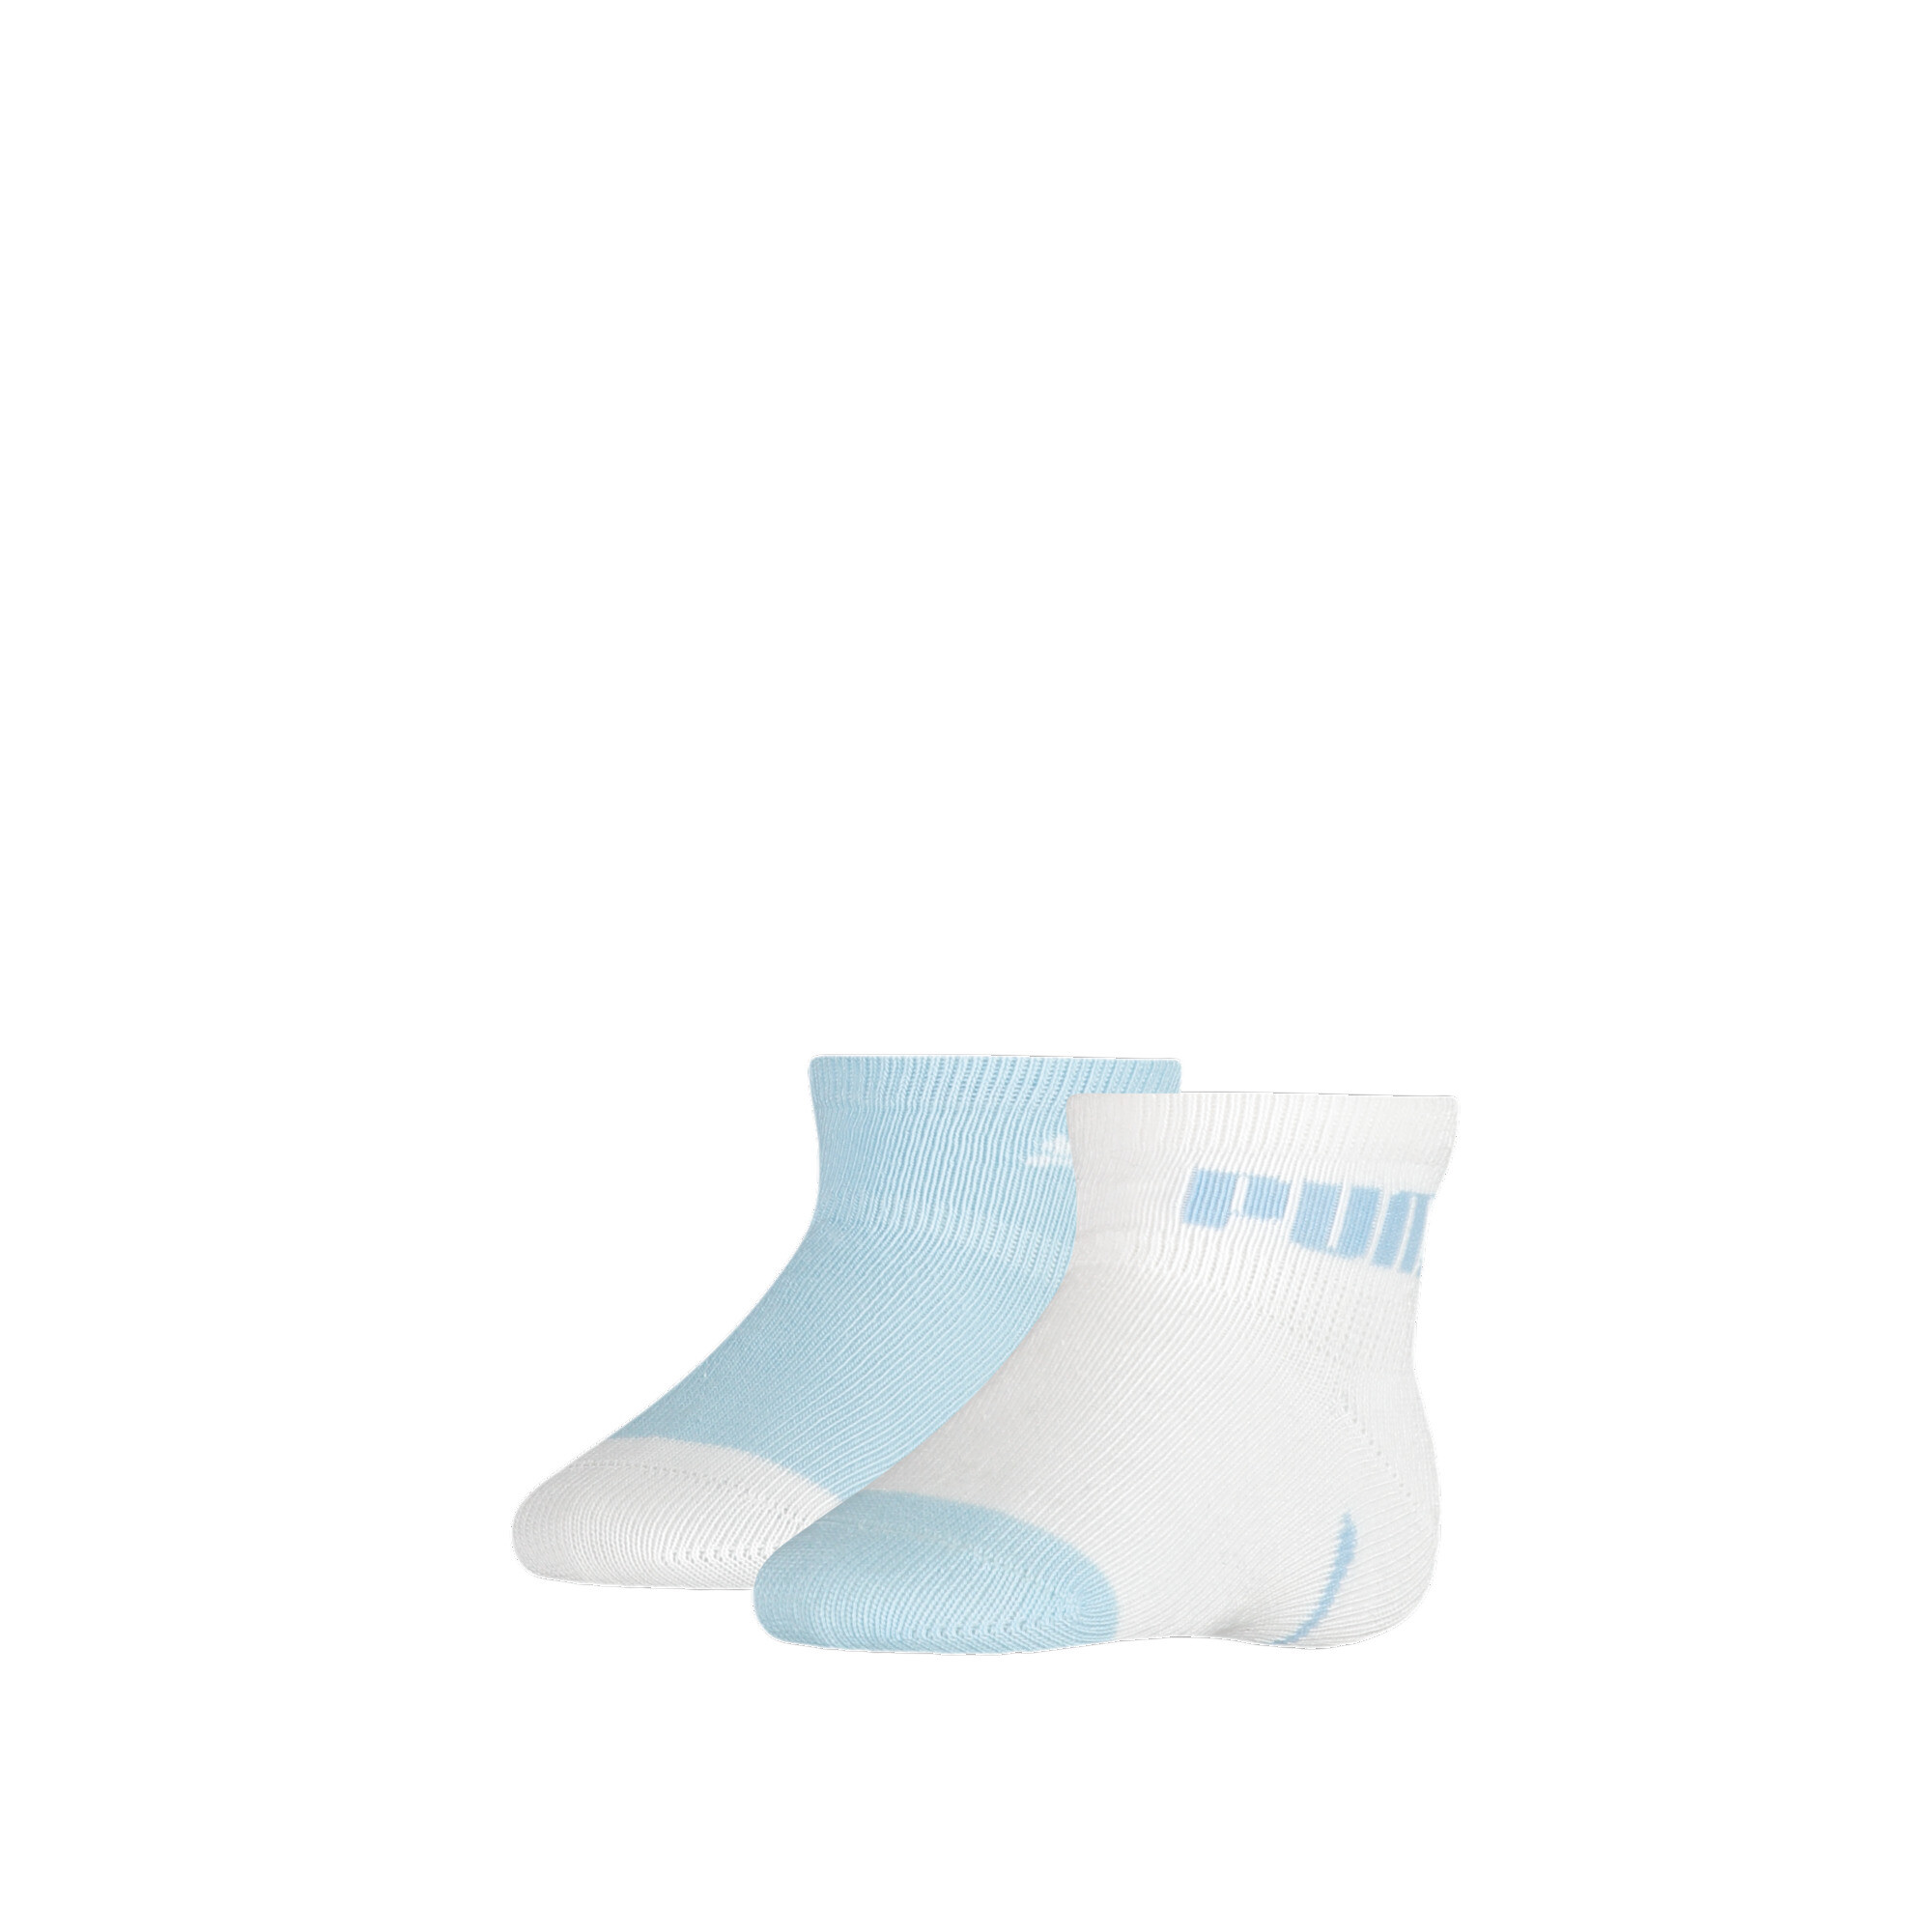 Kids' PUMA Baby Mini Cats Lifestyle Socks 2 Pack In Blue, Size 19-22